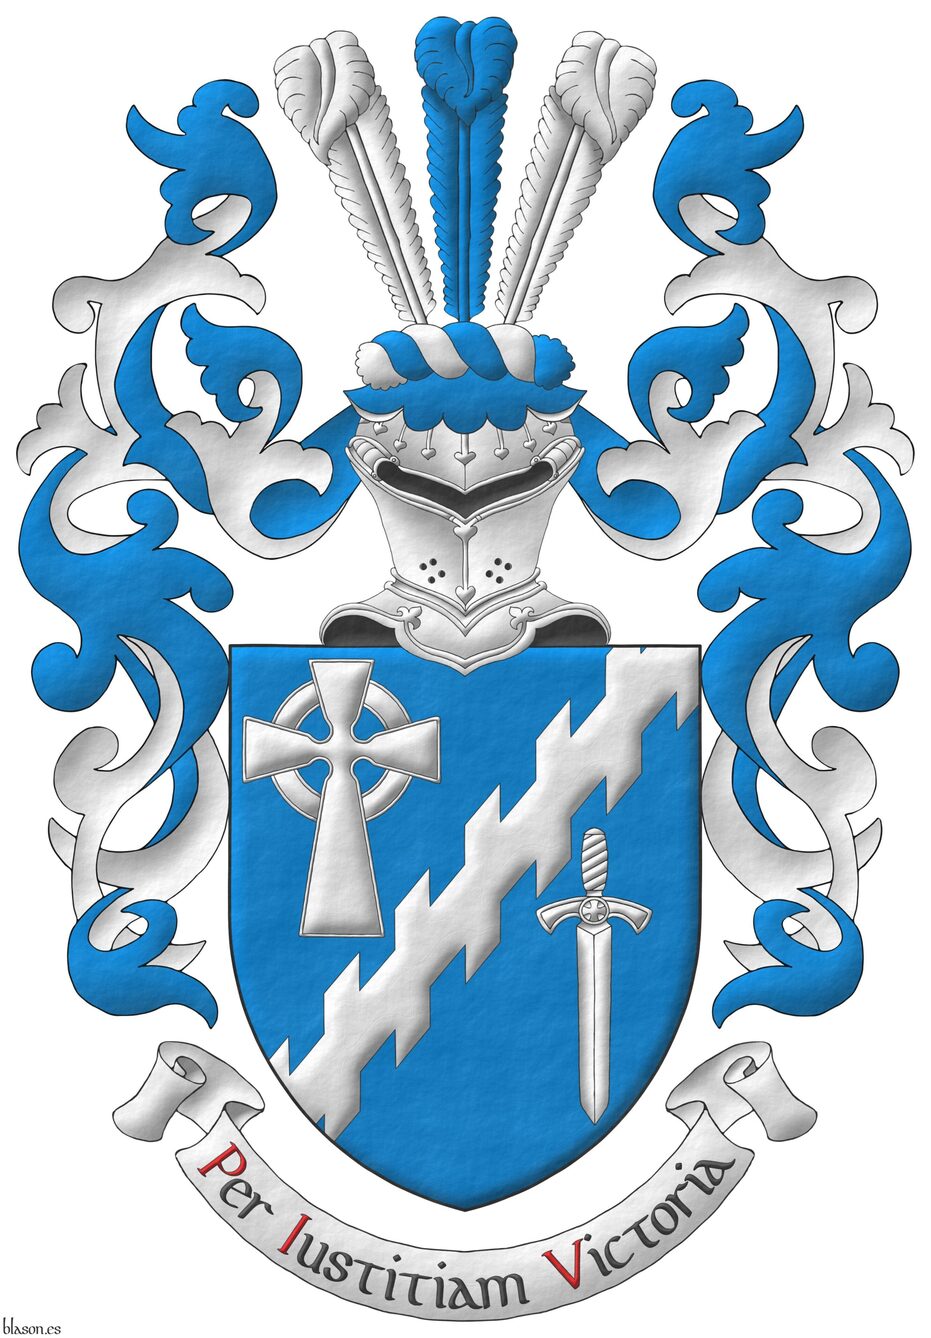 Azure, a bend sinister raguly between, in dexter chief, a Celtic cross, in sinister base, a sword point downwards Argent. Crest: Upon a helm affronty with a wreath Argent and Azure, three ostrich feathers alternately Argent and Azure. Mantling: Azure doubled Argent. Motto: Per Iustitiam Victoria Sable, with initial letters Gules, over a scroll Argent.